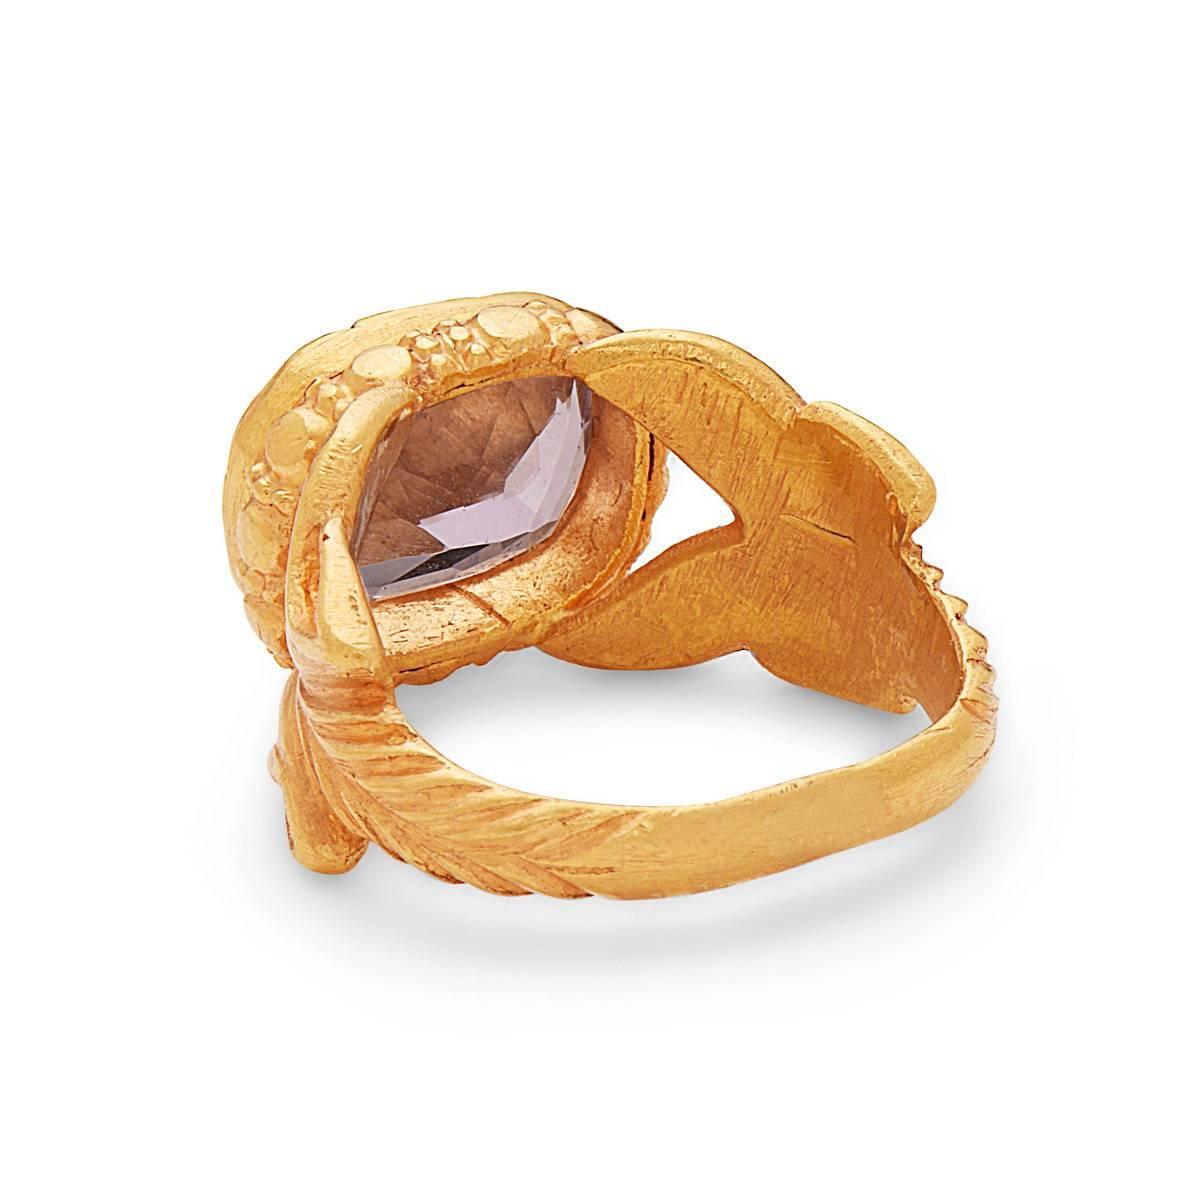 Antique looking beautiful hand carved Rose Amethyst Ring in 22K Yellow Gold.

Ring Size: 7.75 ( can be sized )

Gold: 10.58gms
Rose Amethyst: 4.8cts
